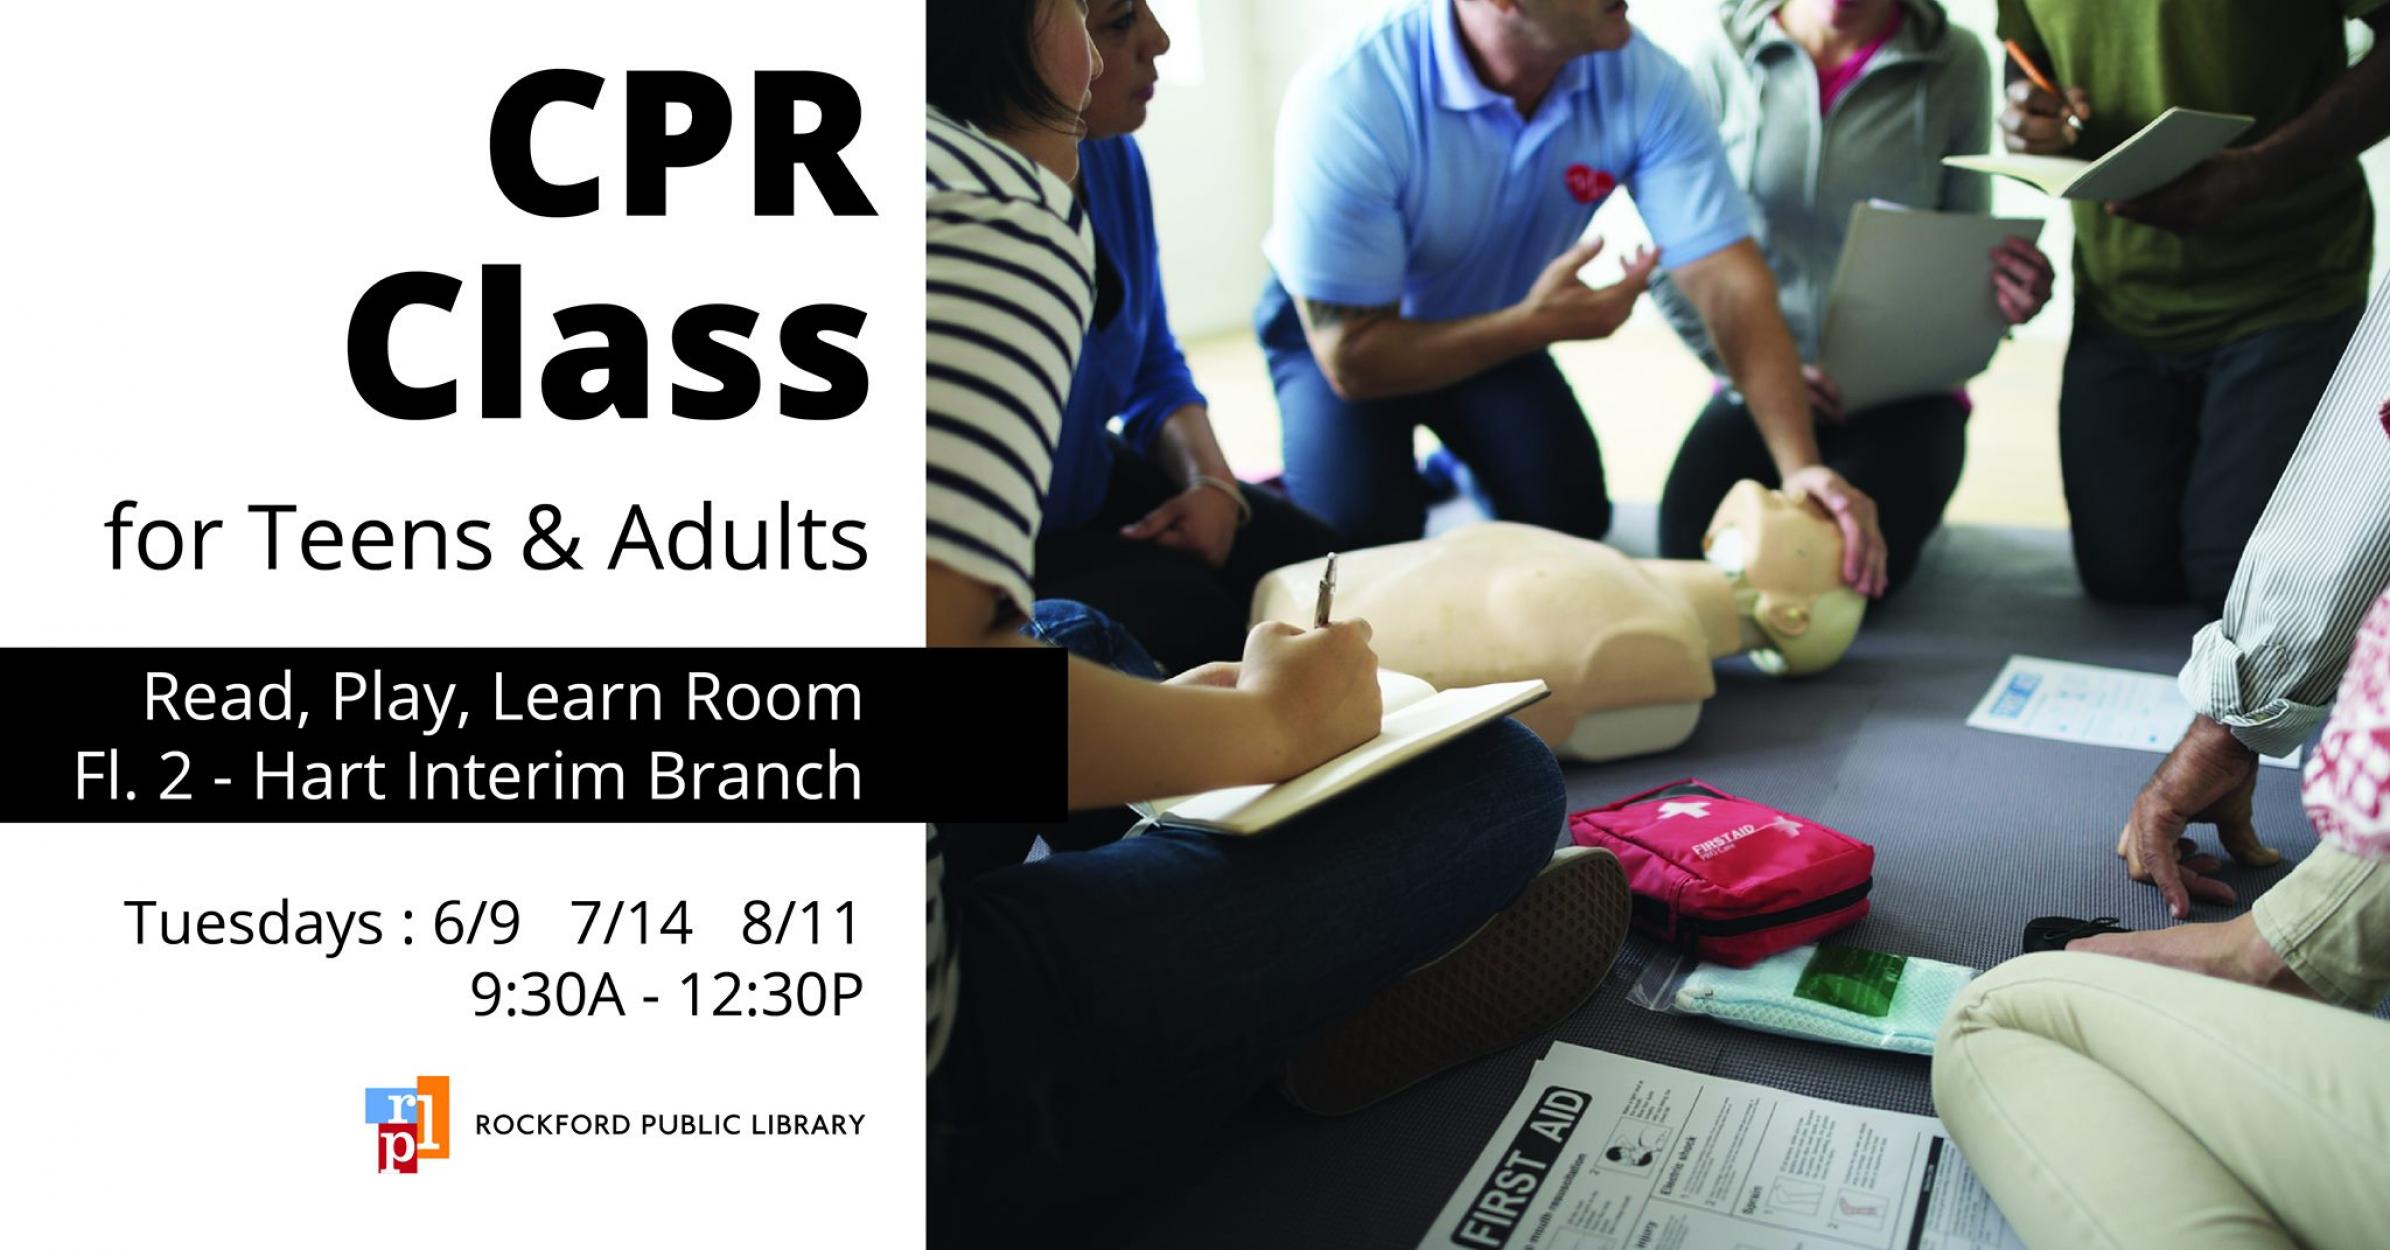 CPR Class for Teens & Adults